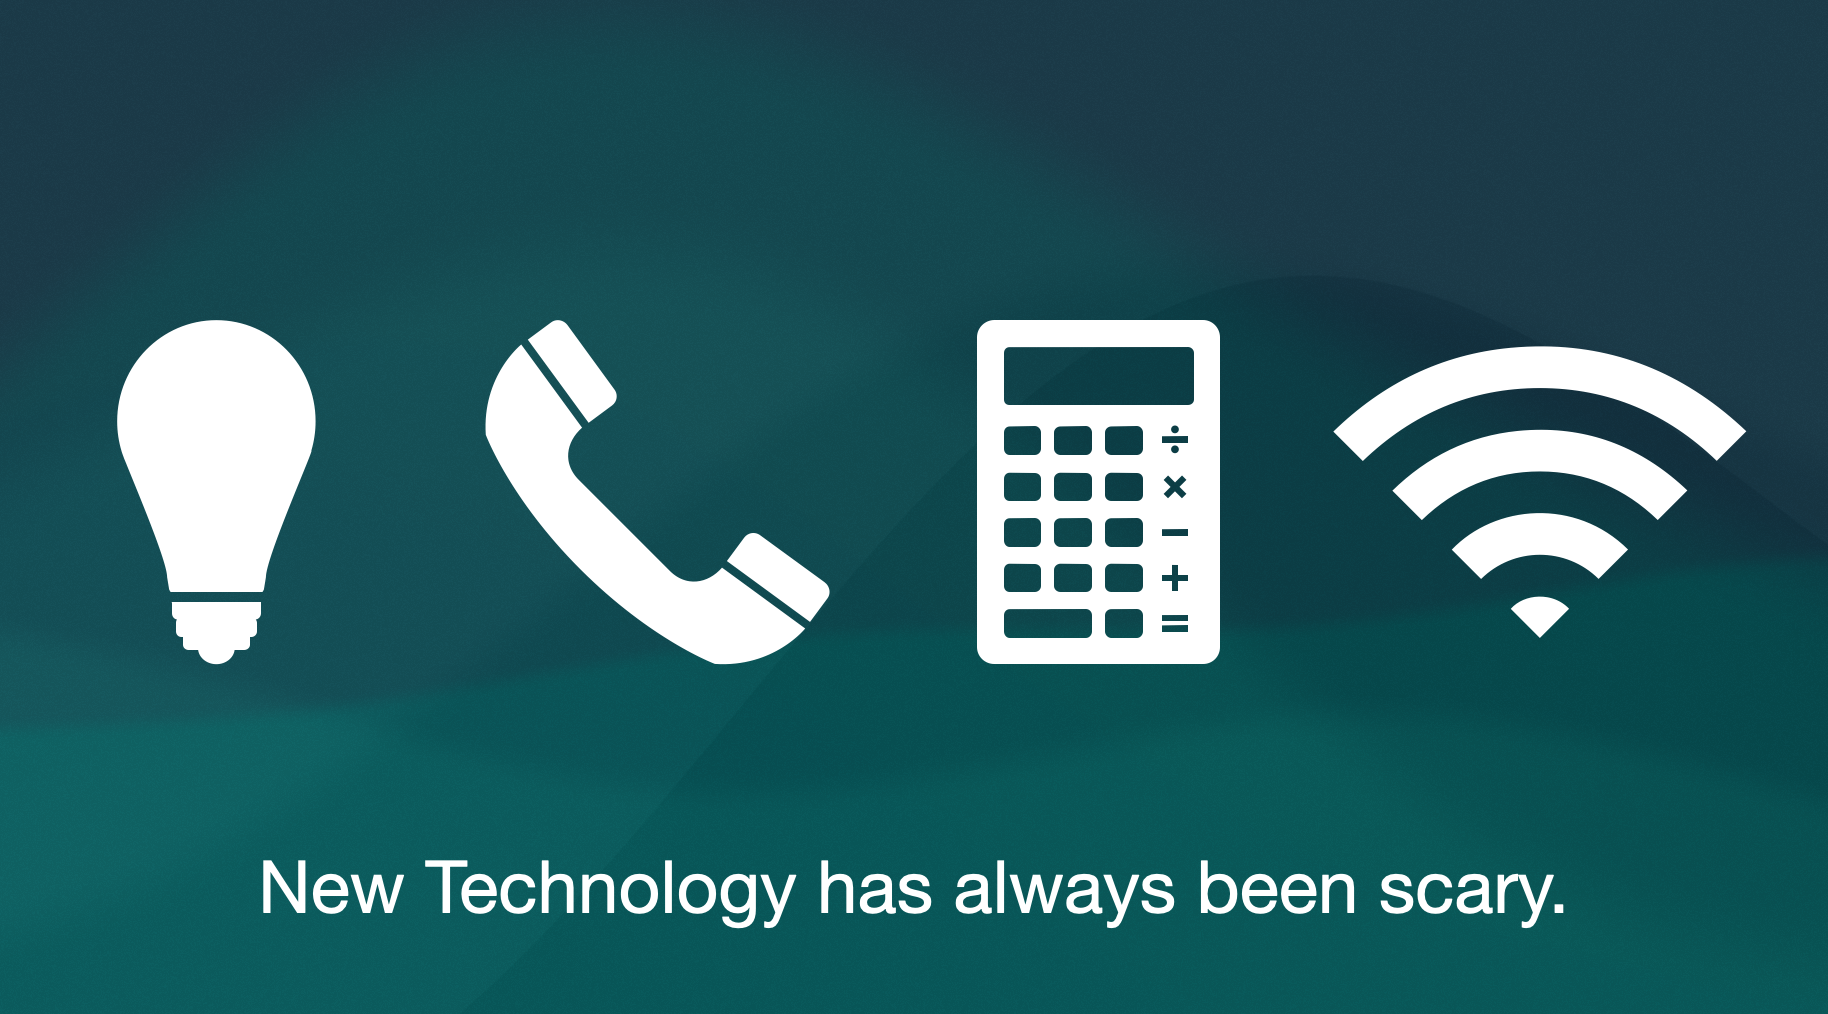 Picture of a lightbulb, telephone, calculator and wifi symbol with the caption "New technology has always been scary. 